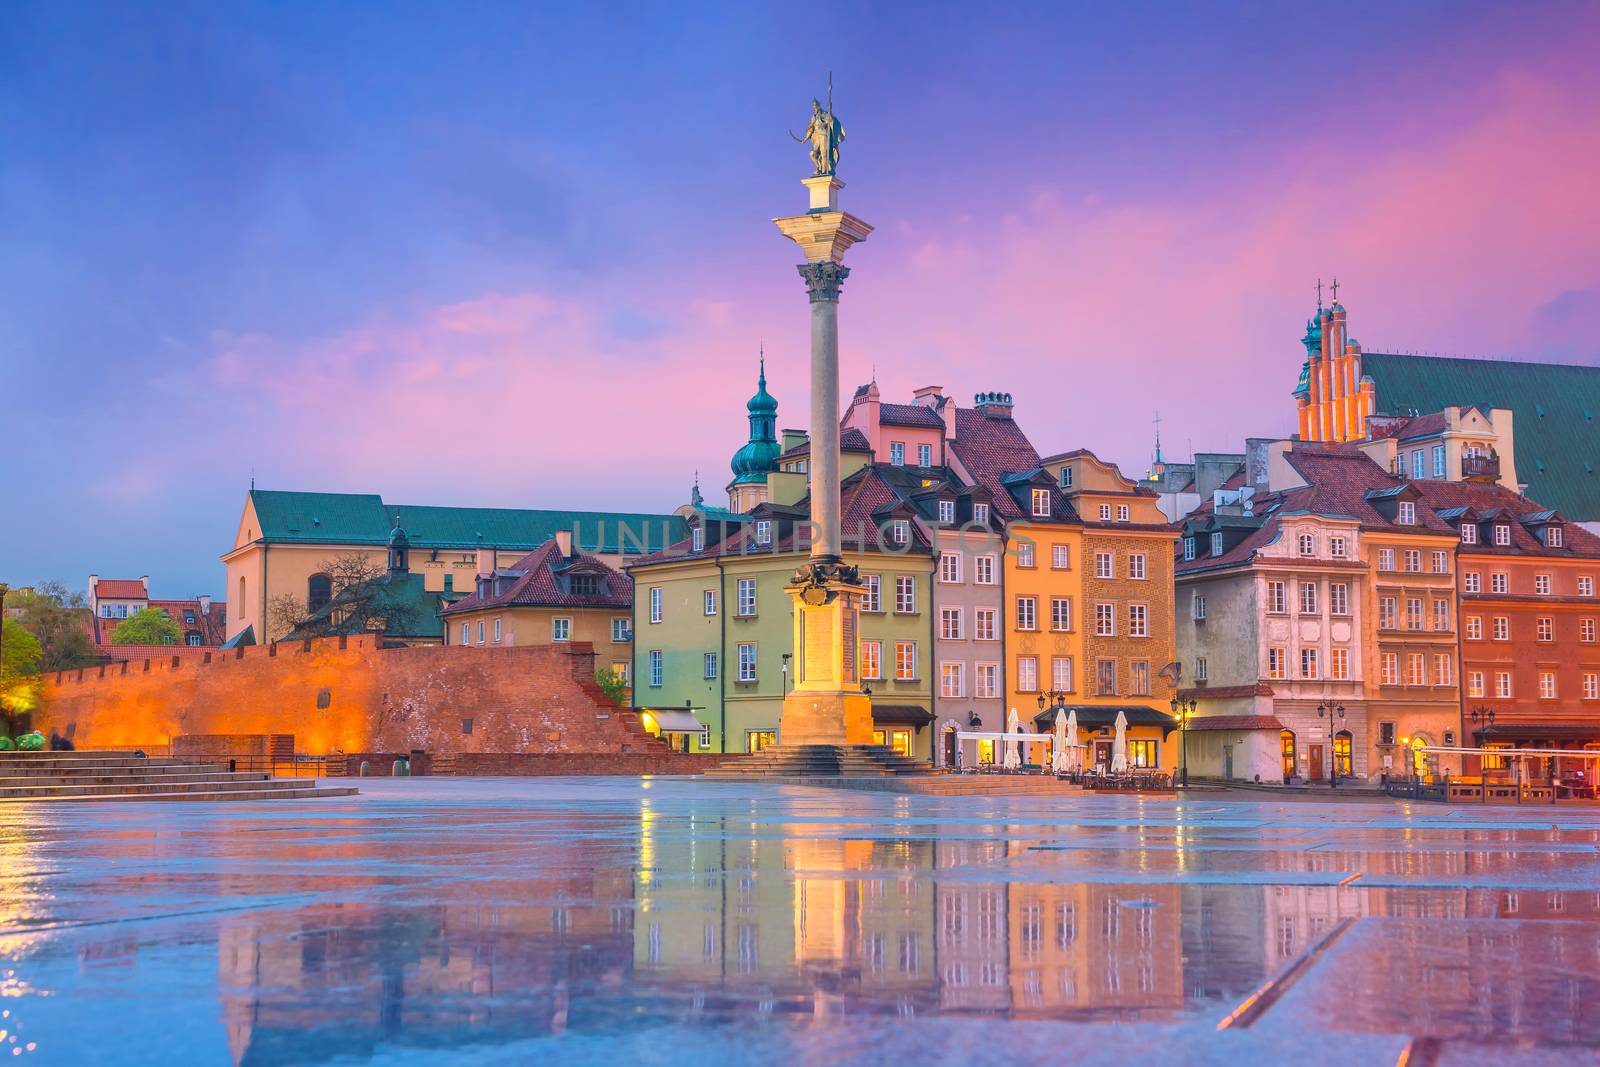 Old town in Warsaw, Poland at twilight